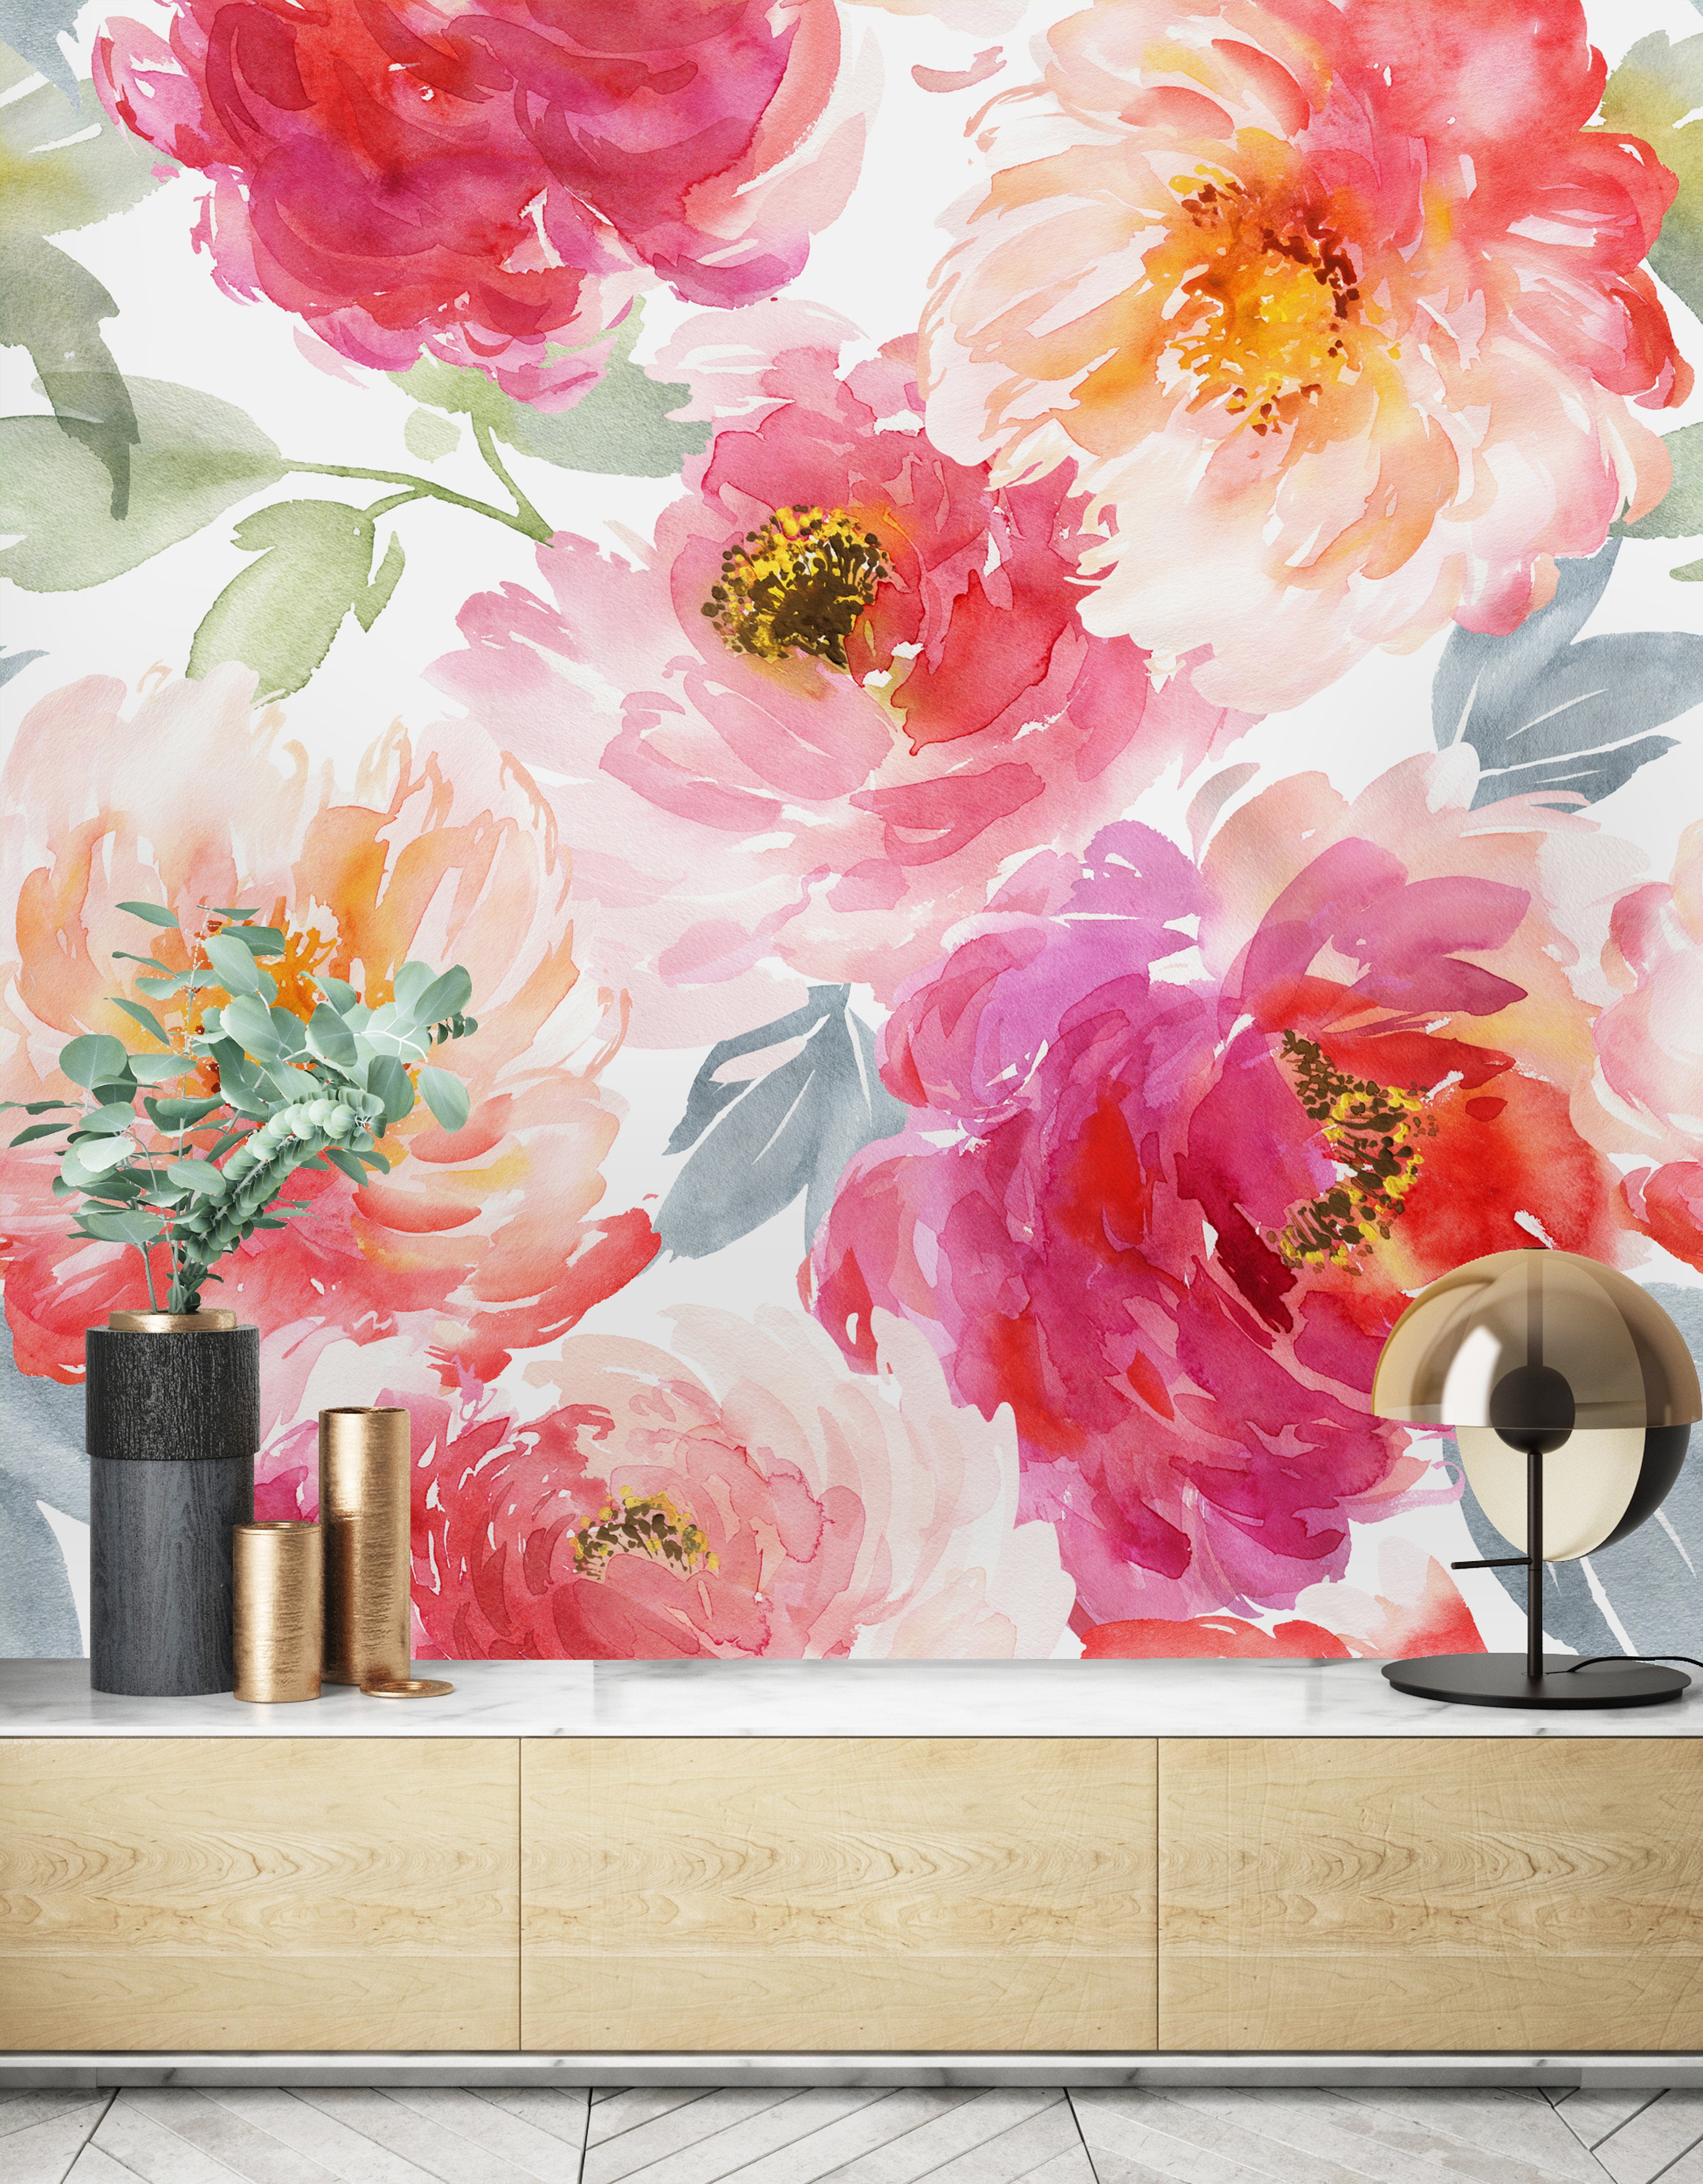 Details about   3D Pink Tulips Flower 581RAI Wallpaper Mural Self-adhesive Removable Sticker Amy 